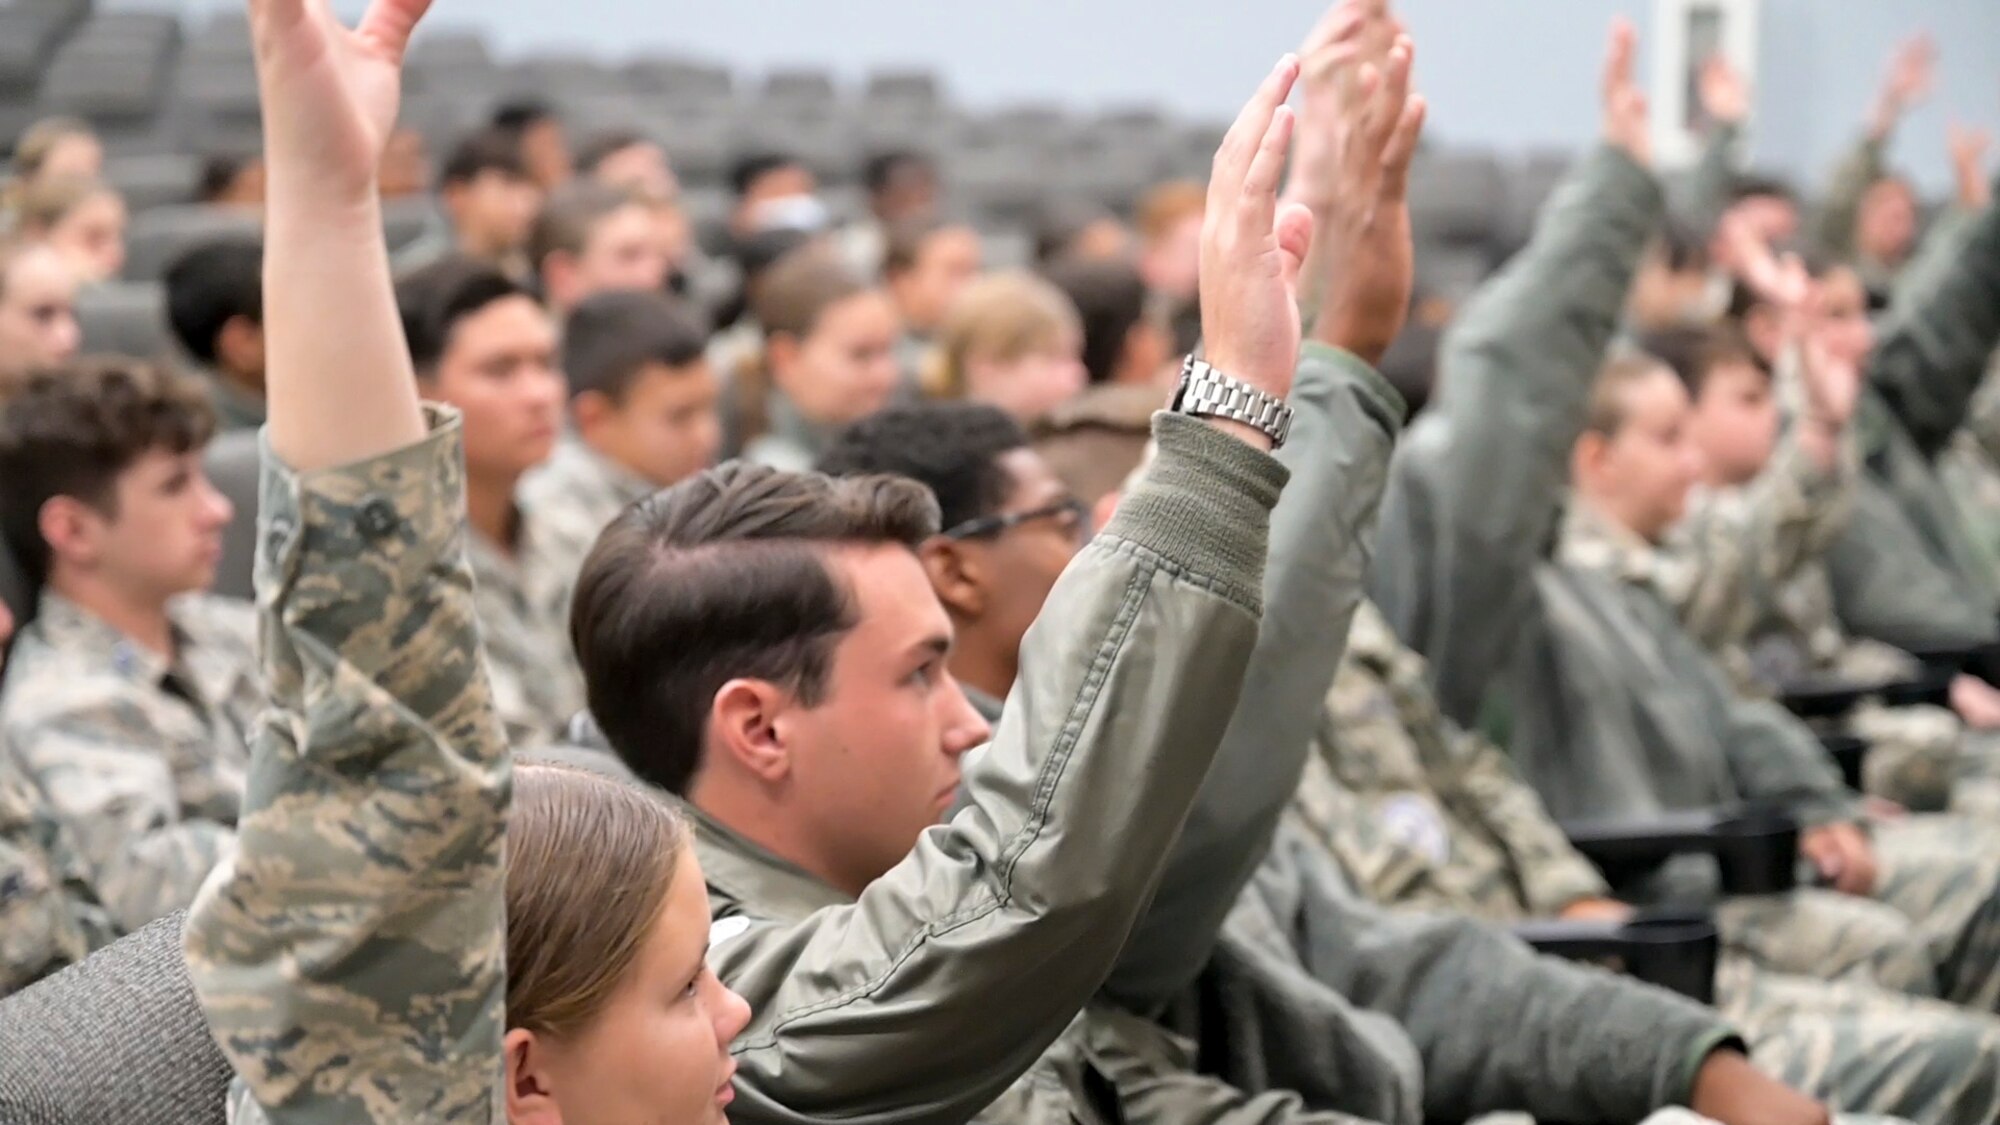 About 100 JROTC cadets from Desert High School came to learn the way of the Defender from the 412th Security Forces Squadron at Edwards Air Force Base, California. With this knowledge, these cadets may then graduate high school and move on to the grueling task of basic training.